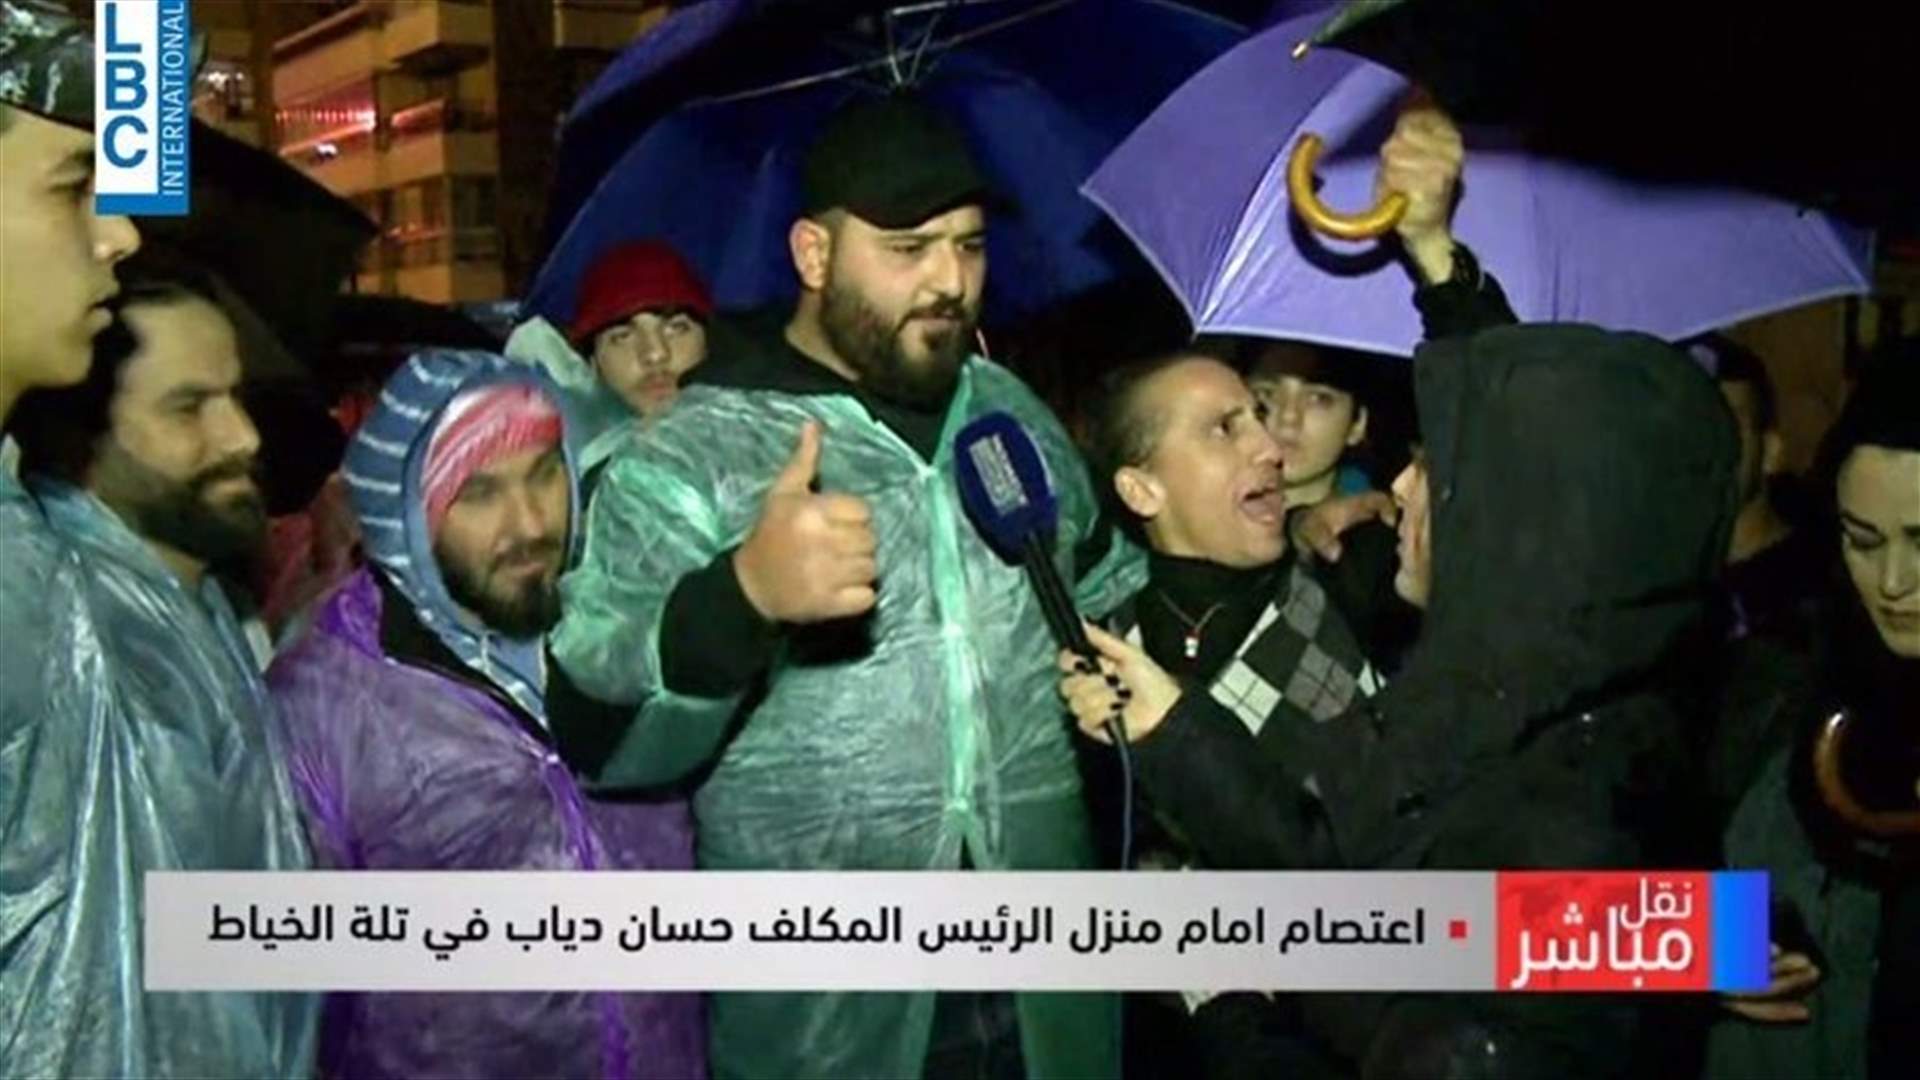 Activists stage sit-in outside Hassan Diab’s residence in Tallat al-Khayat (Video)